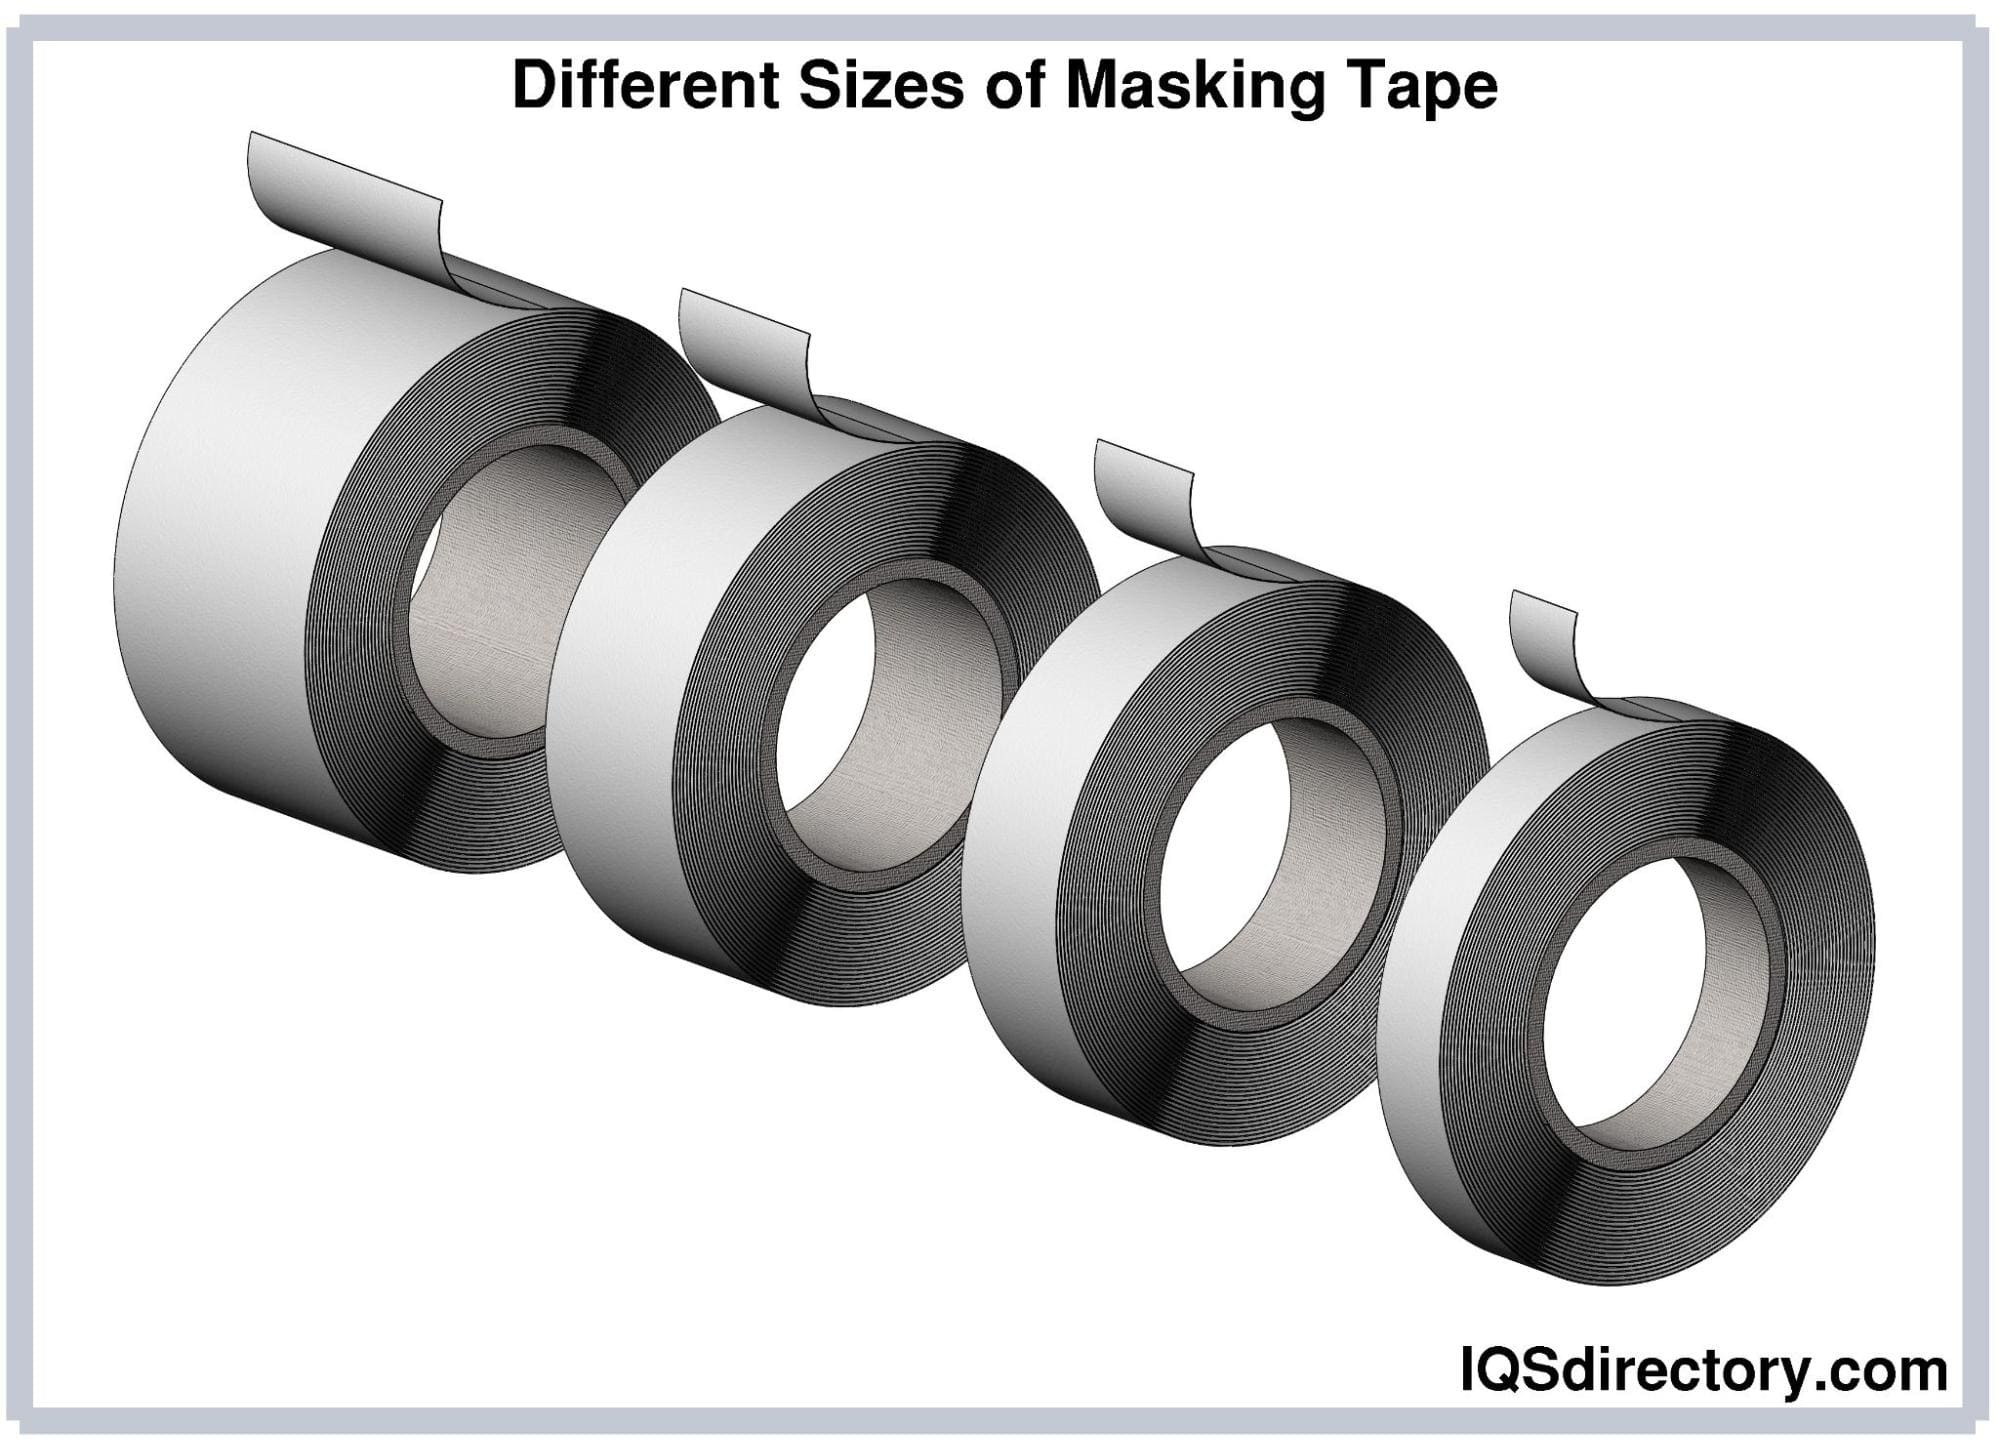 Different sizes of Masking tape